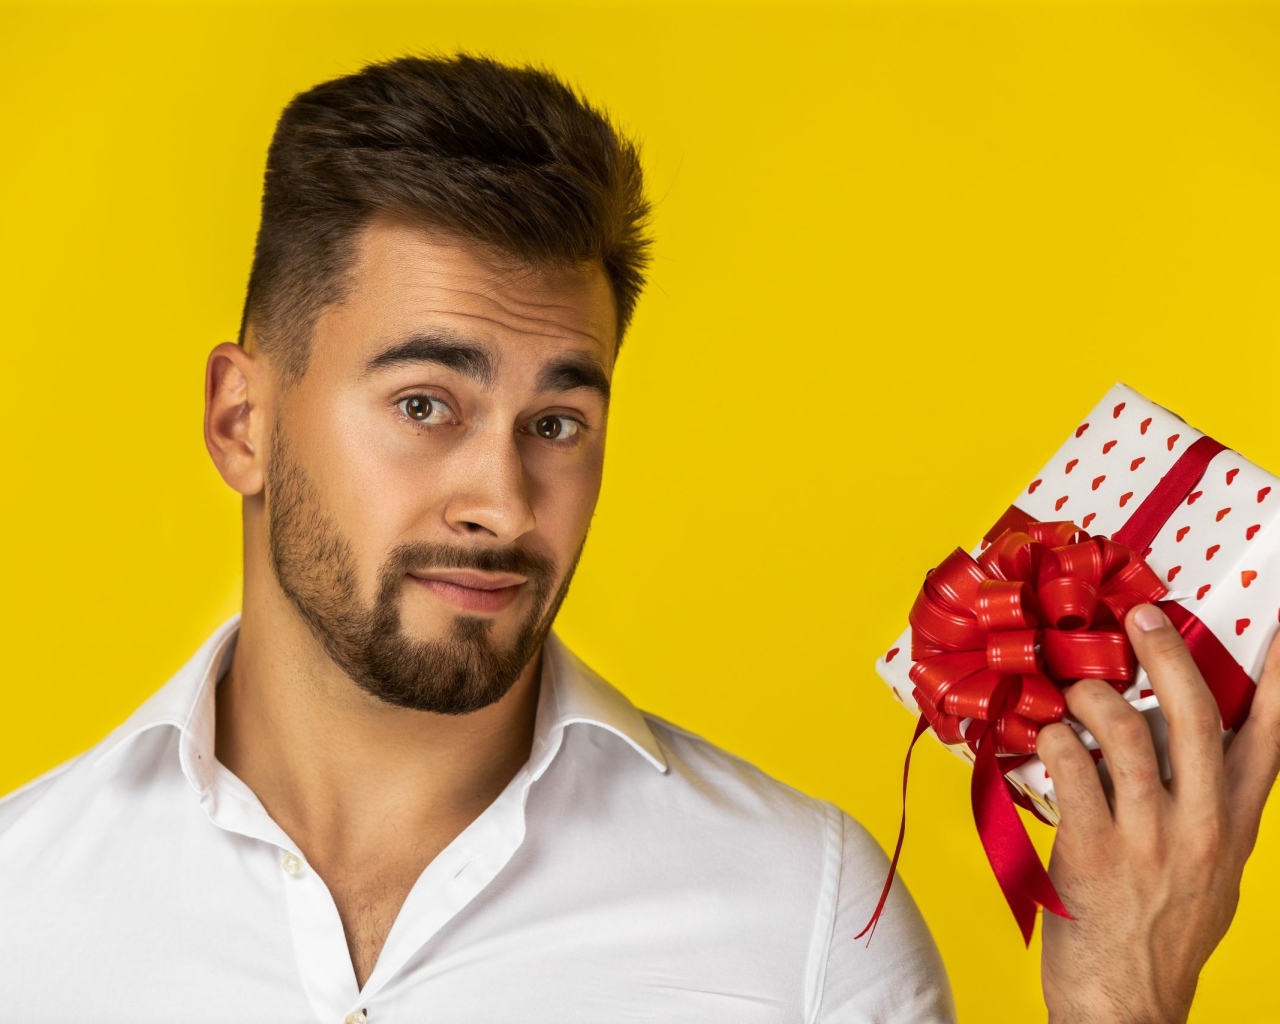 Man with a gift on a yellow background